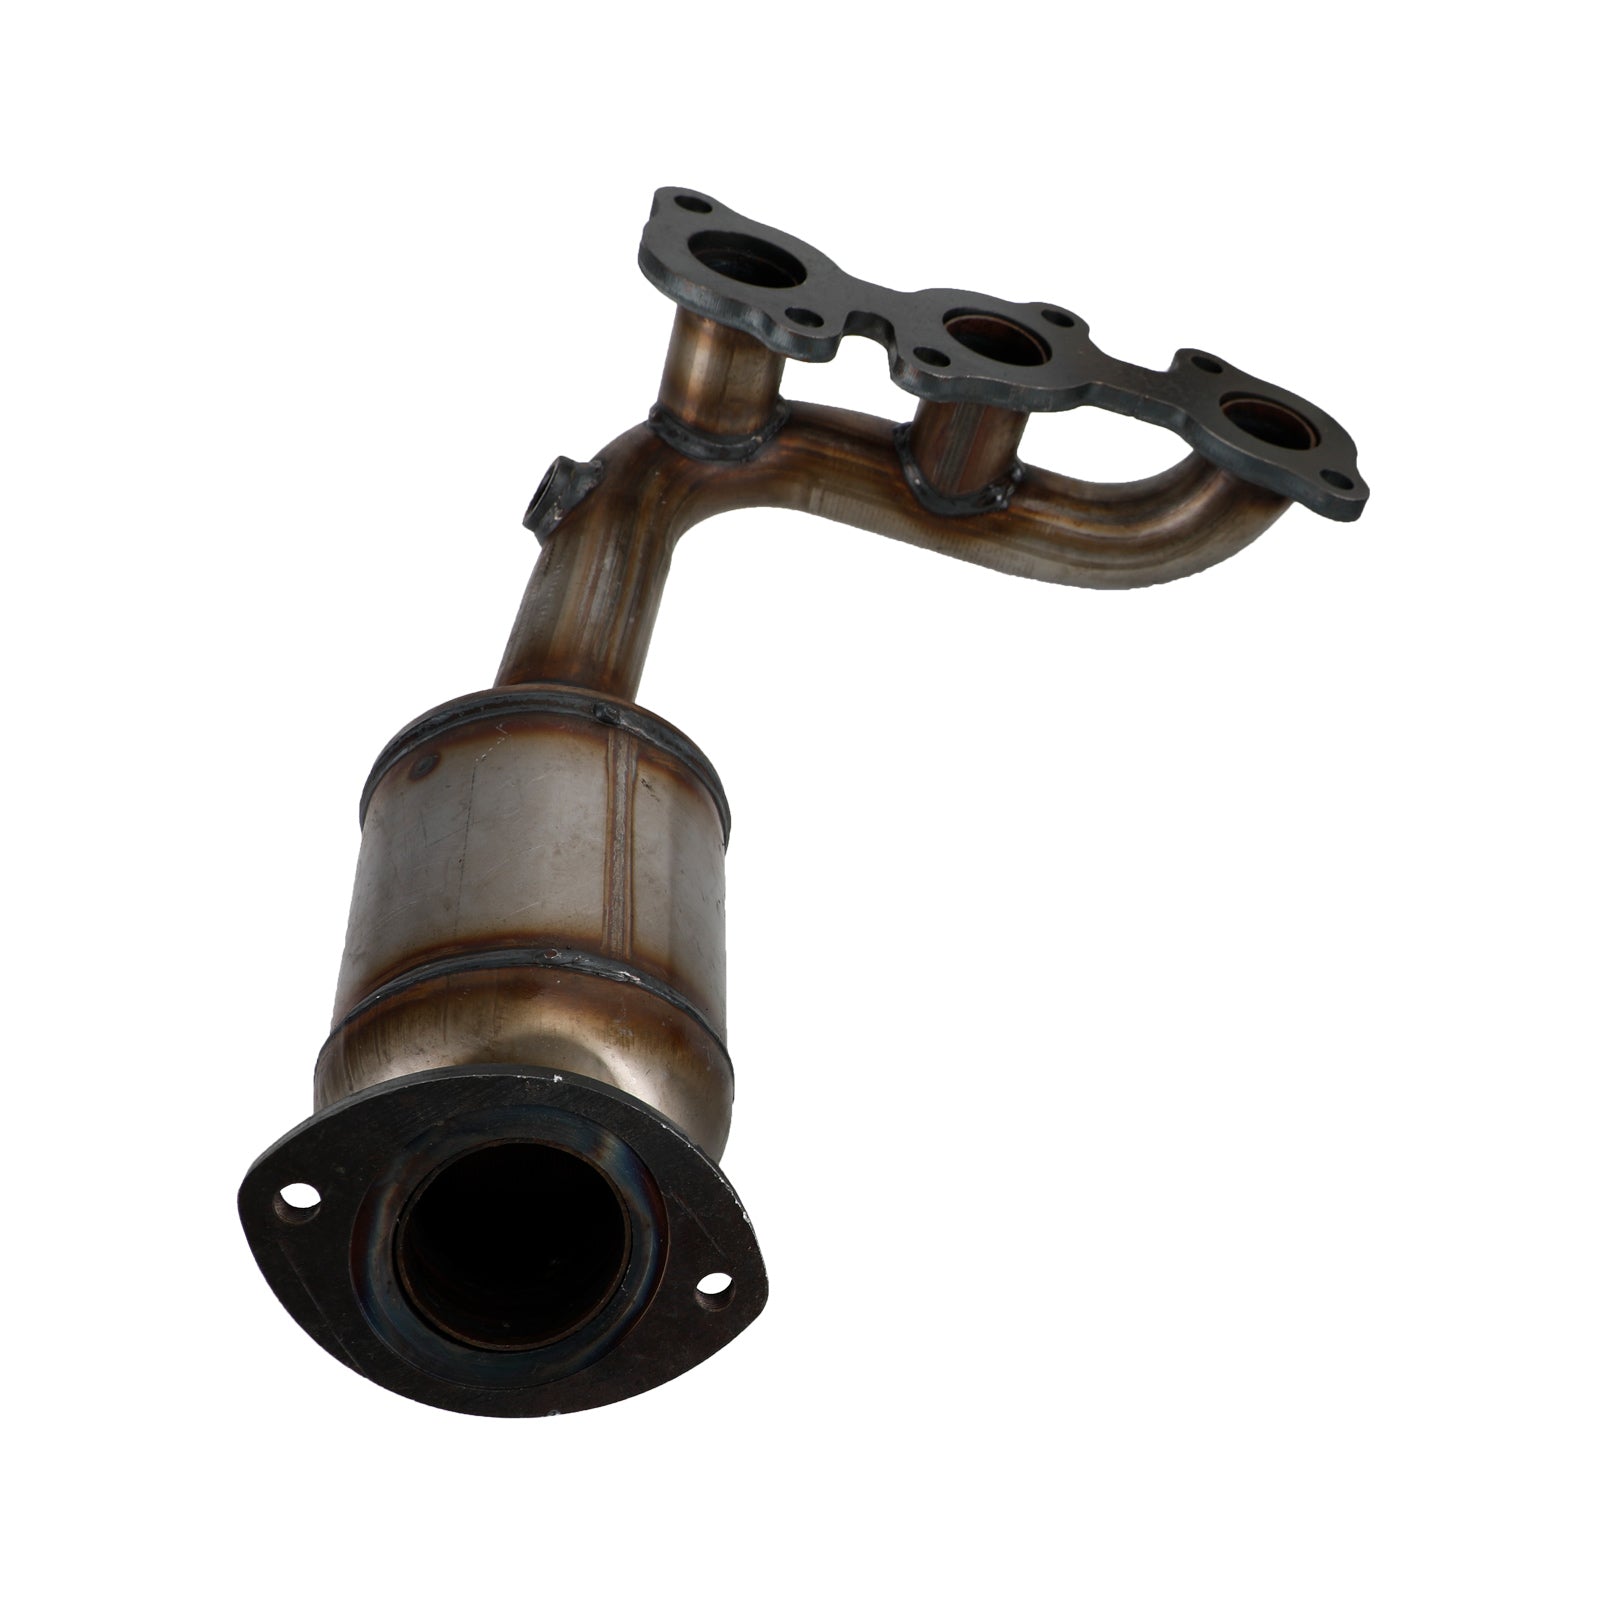 Toyota 2004-2006 Sienna 3.3L AWD Front & Rear Catalytic Converter